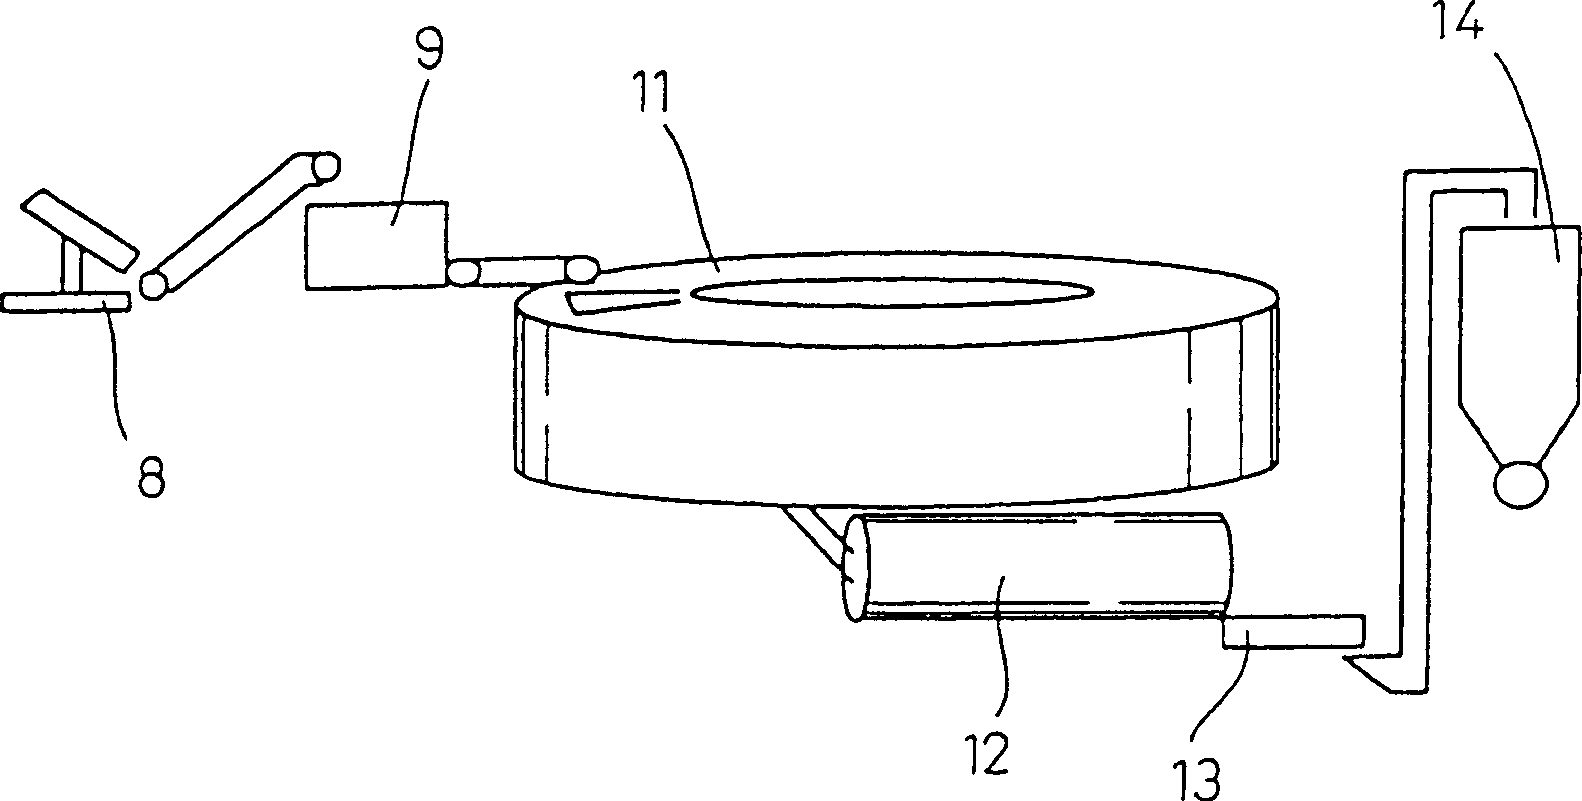 Method for producing reduced iron compact in rotary hearth reducing furnace, reduced iron compact, and method for producing pig iron using the same